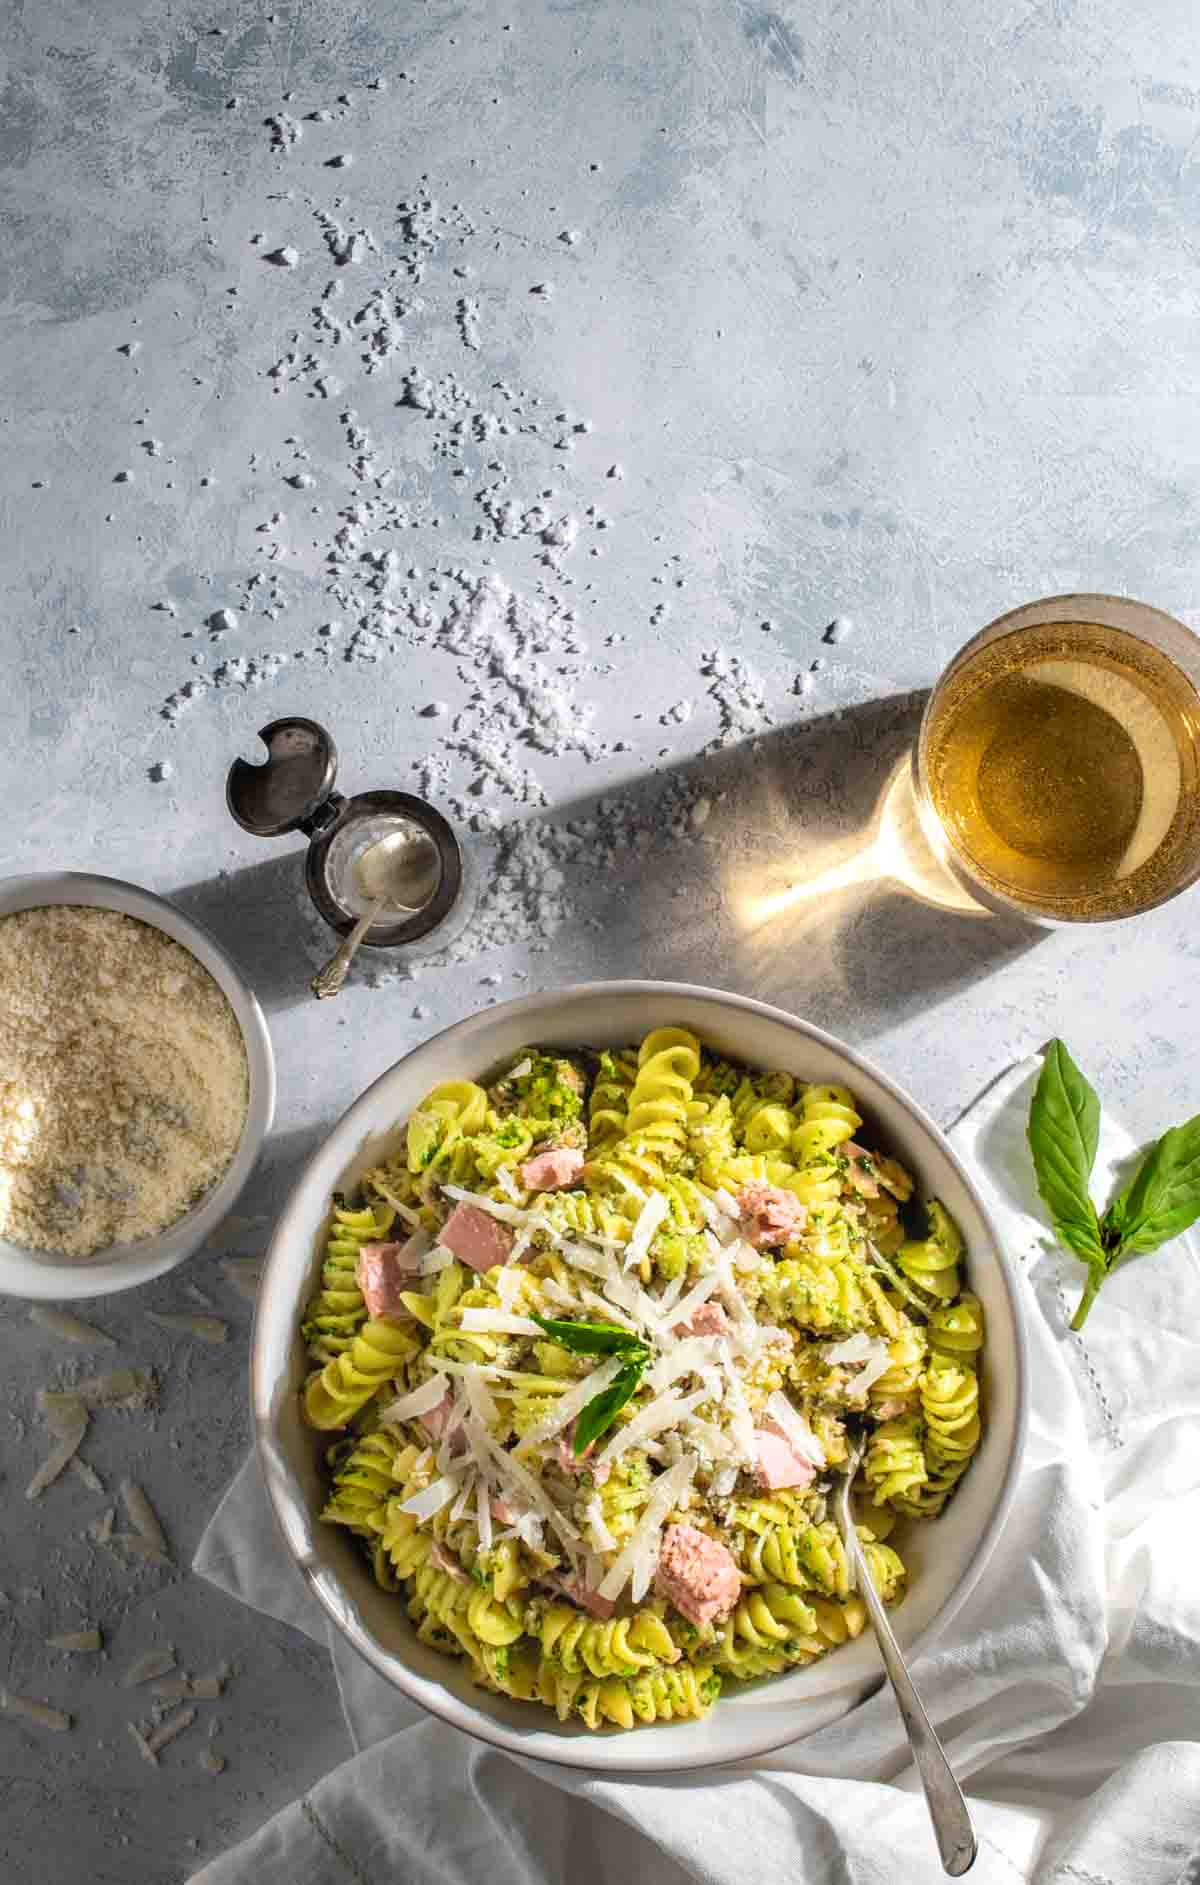 Tuna pesto pasta in light colored bowl with ingredients surrounding it.